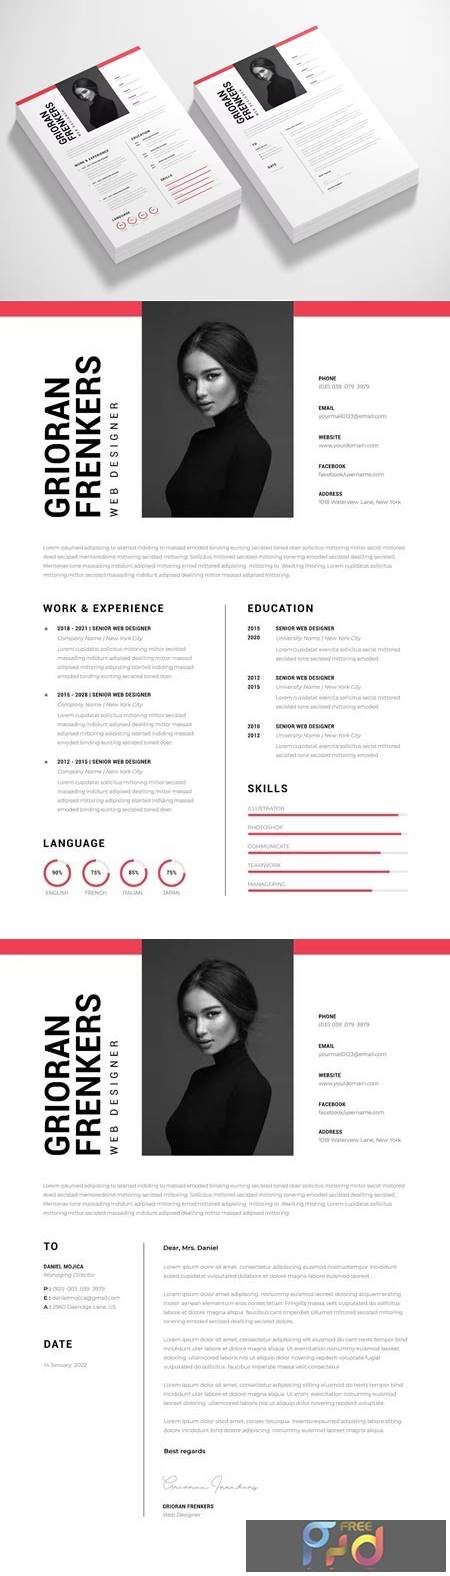 CV Resume & Cover Letter Template A2HVDHC 1